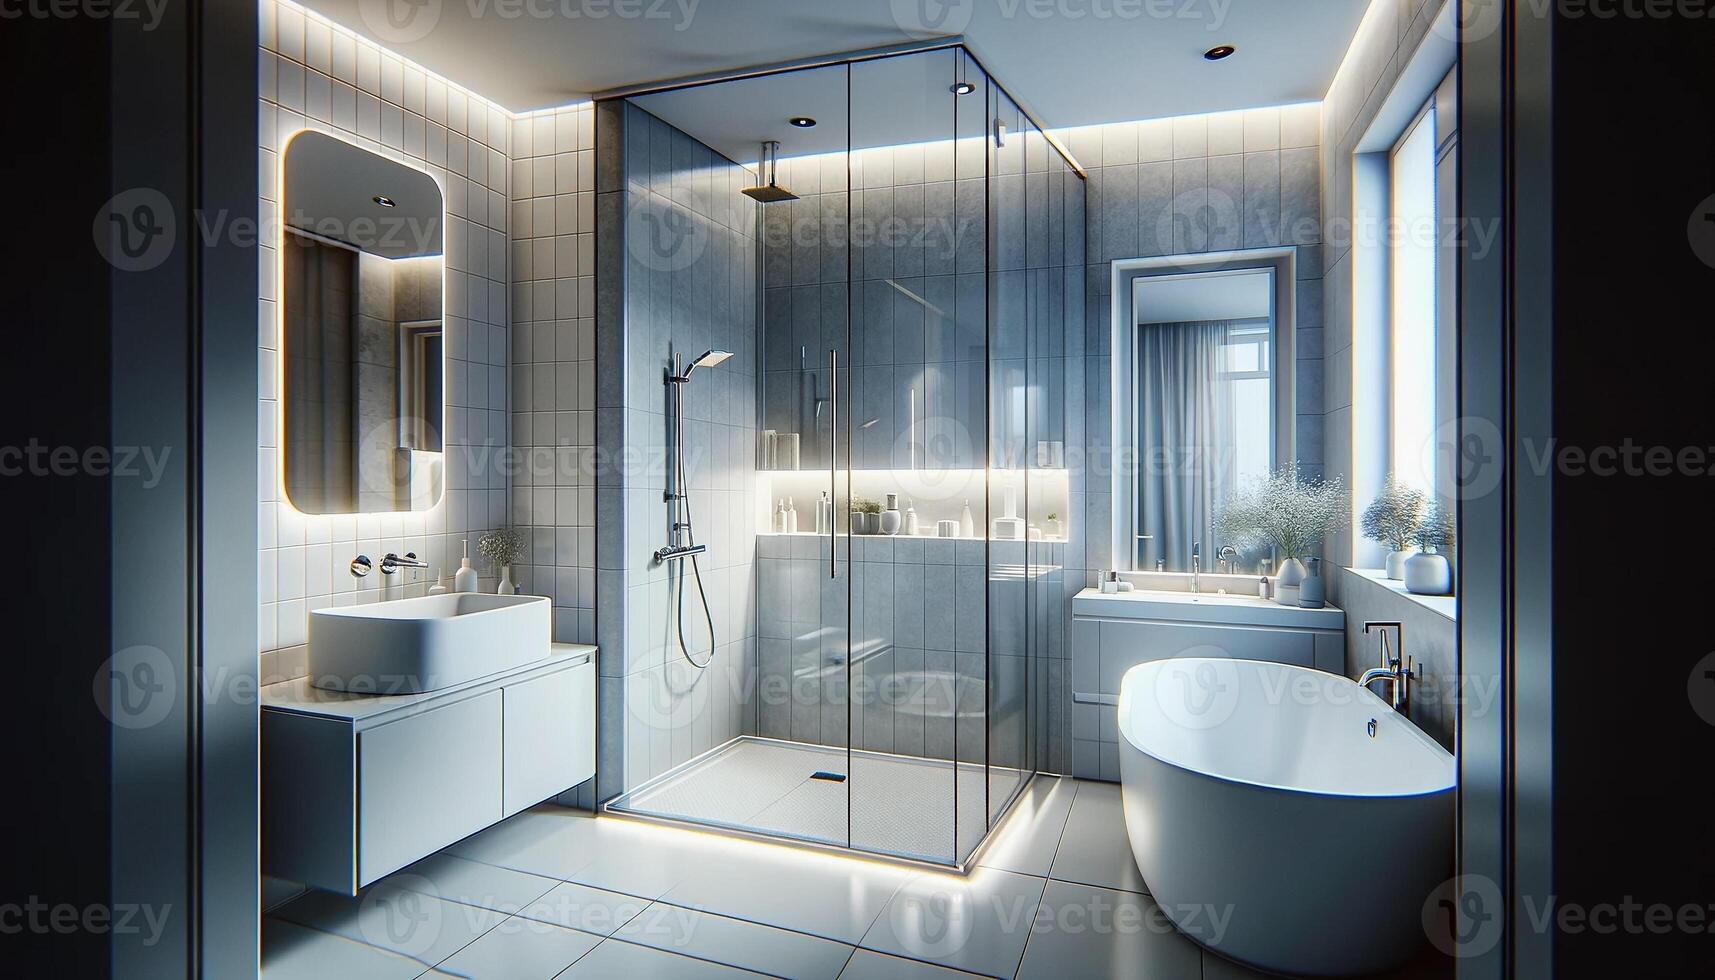 AI Generated A photorealistic depiction of a modern, stylish bathroom in a home setting. The bathroom features a shower cabin with a glass door photo